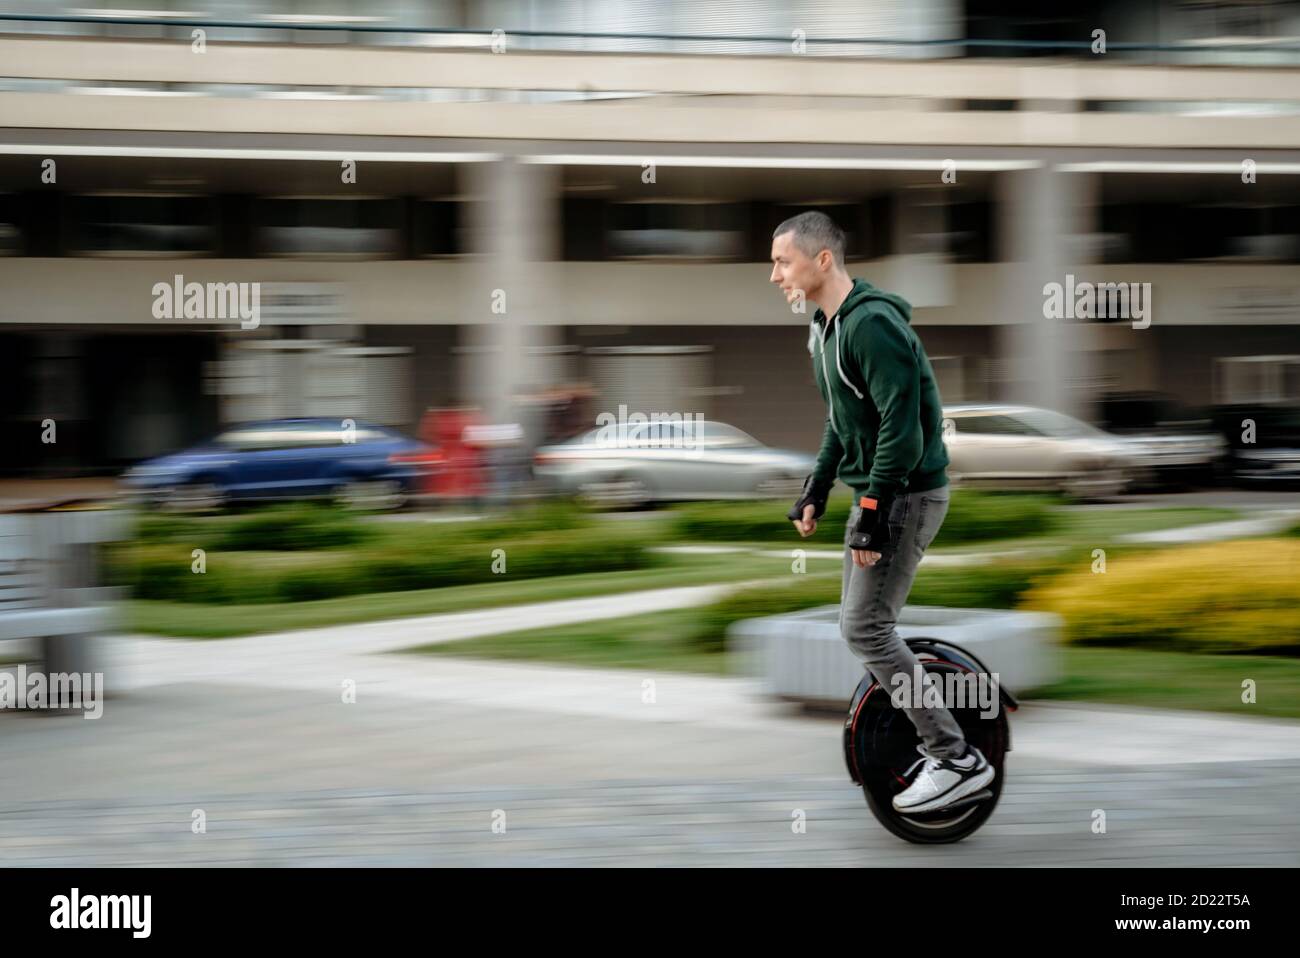 Man riding unicycle on street, electric unicycle, motion blur Stock Photo